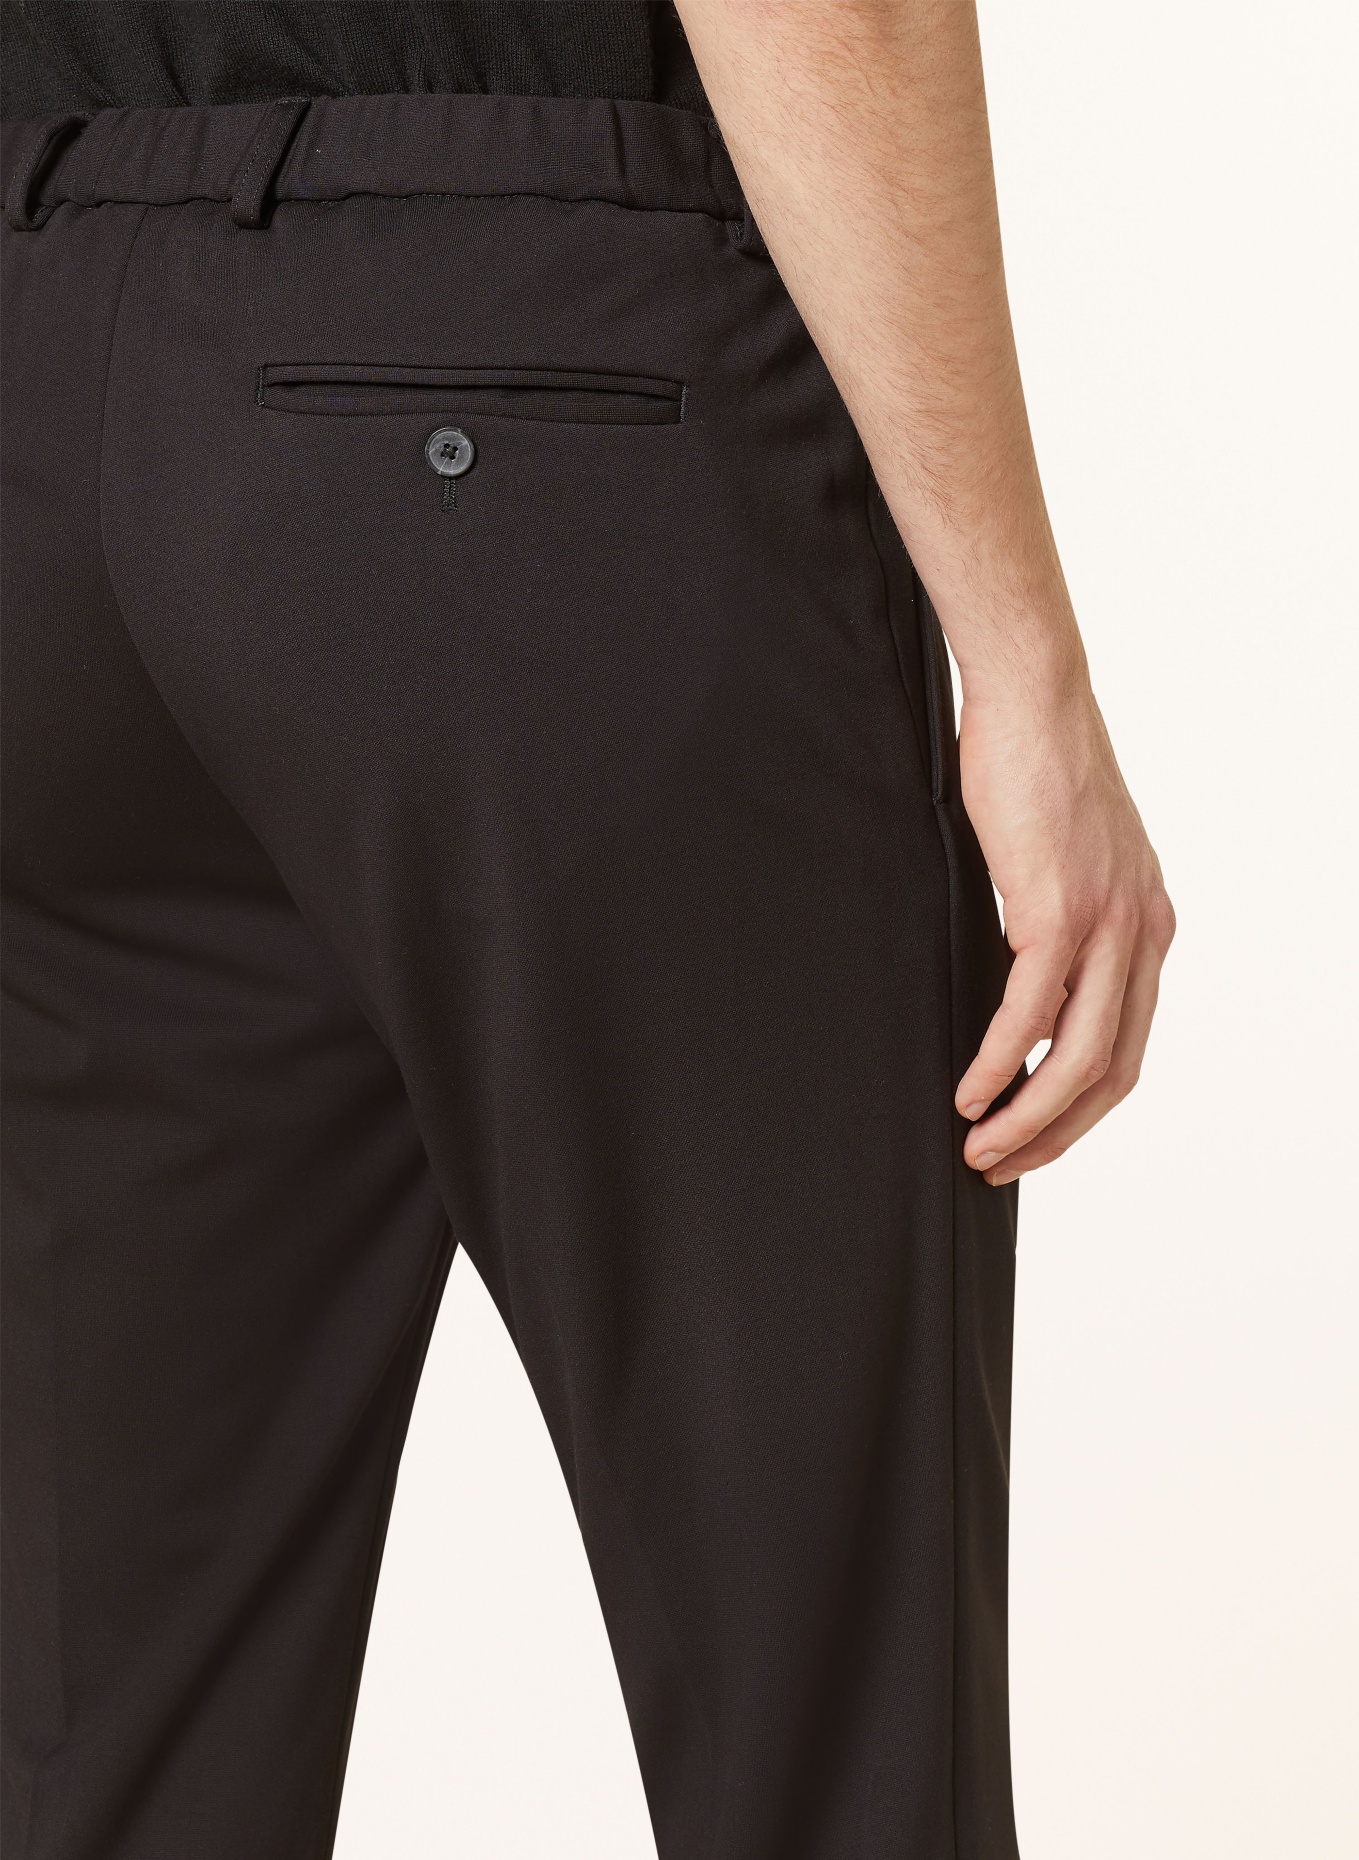 PAUL Suit trousers extra slim fit made of jersey, Color: BLACK (Image 7)